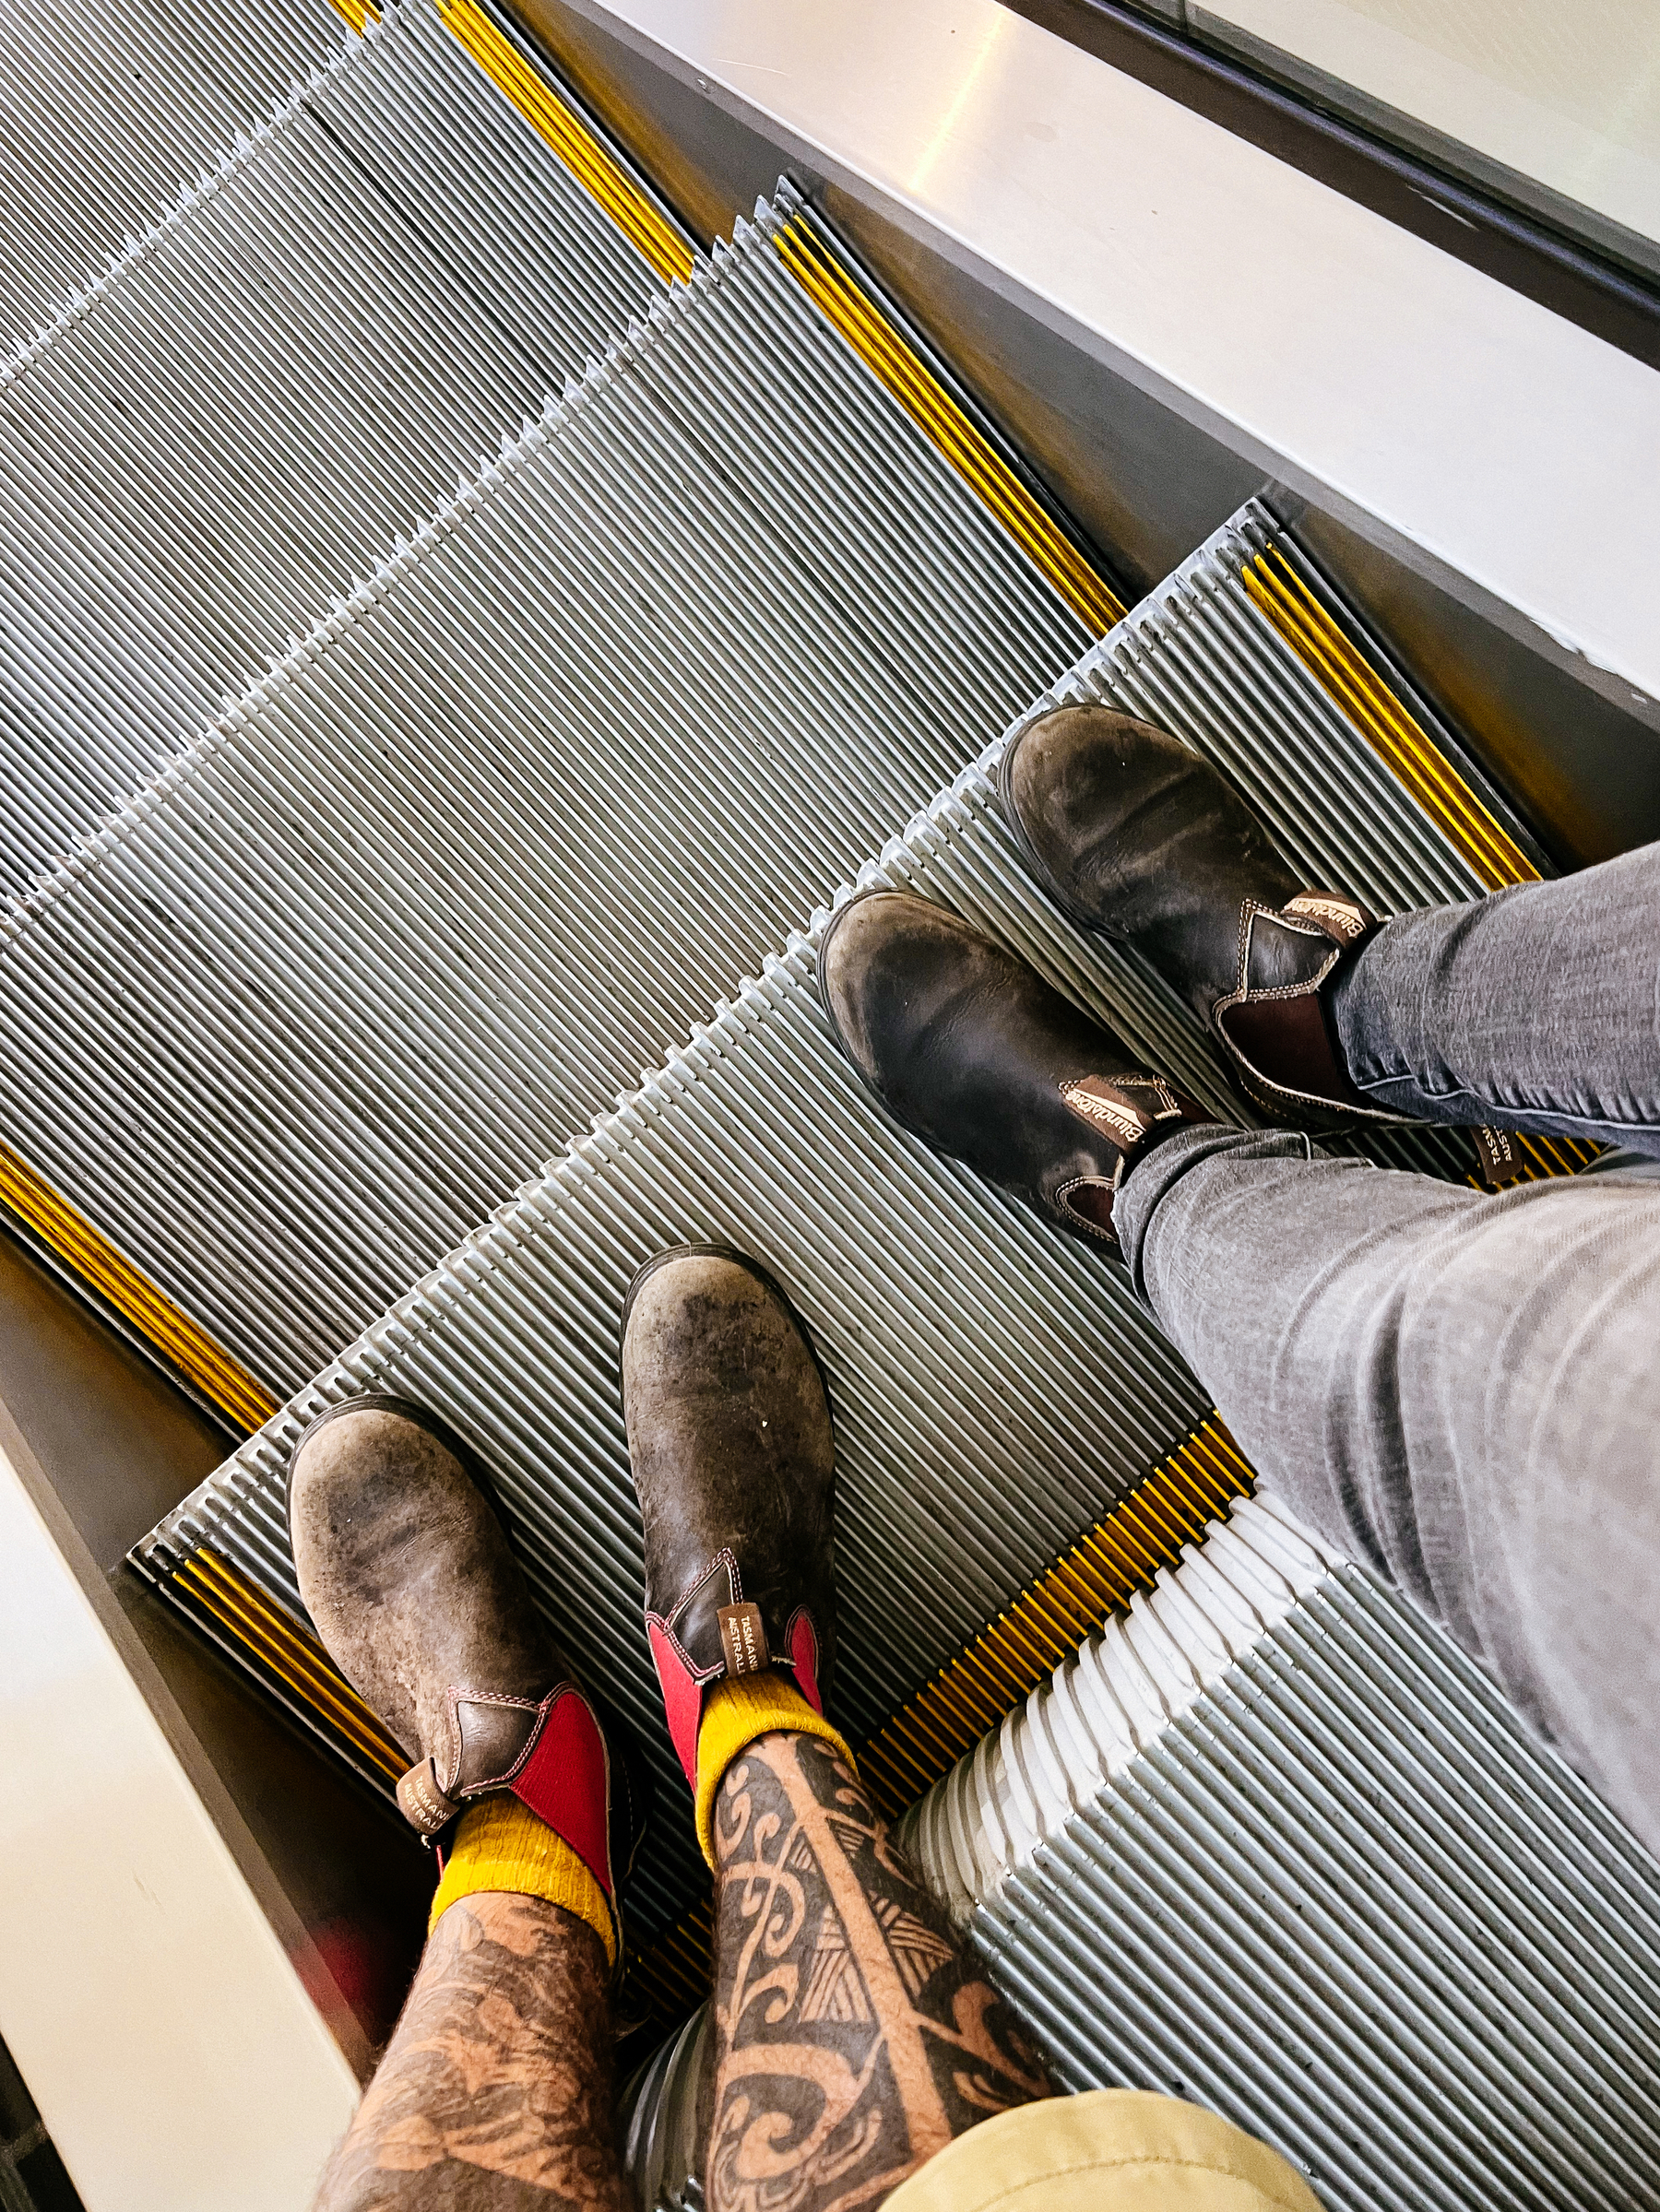 Looking down on two pairs of legs, on an escalator.